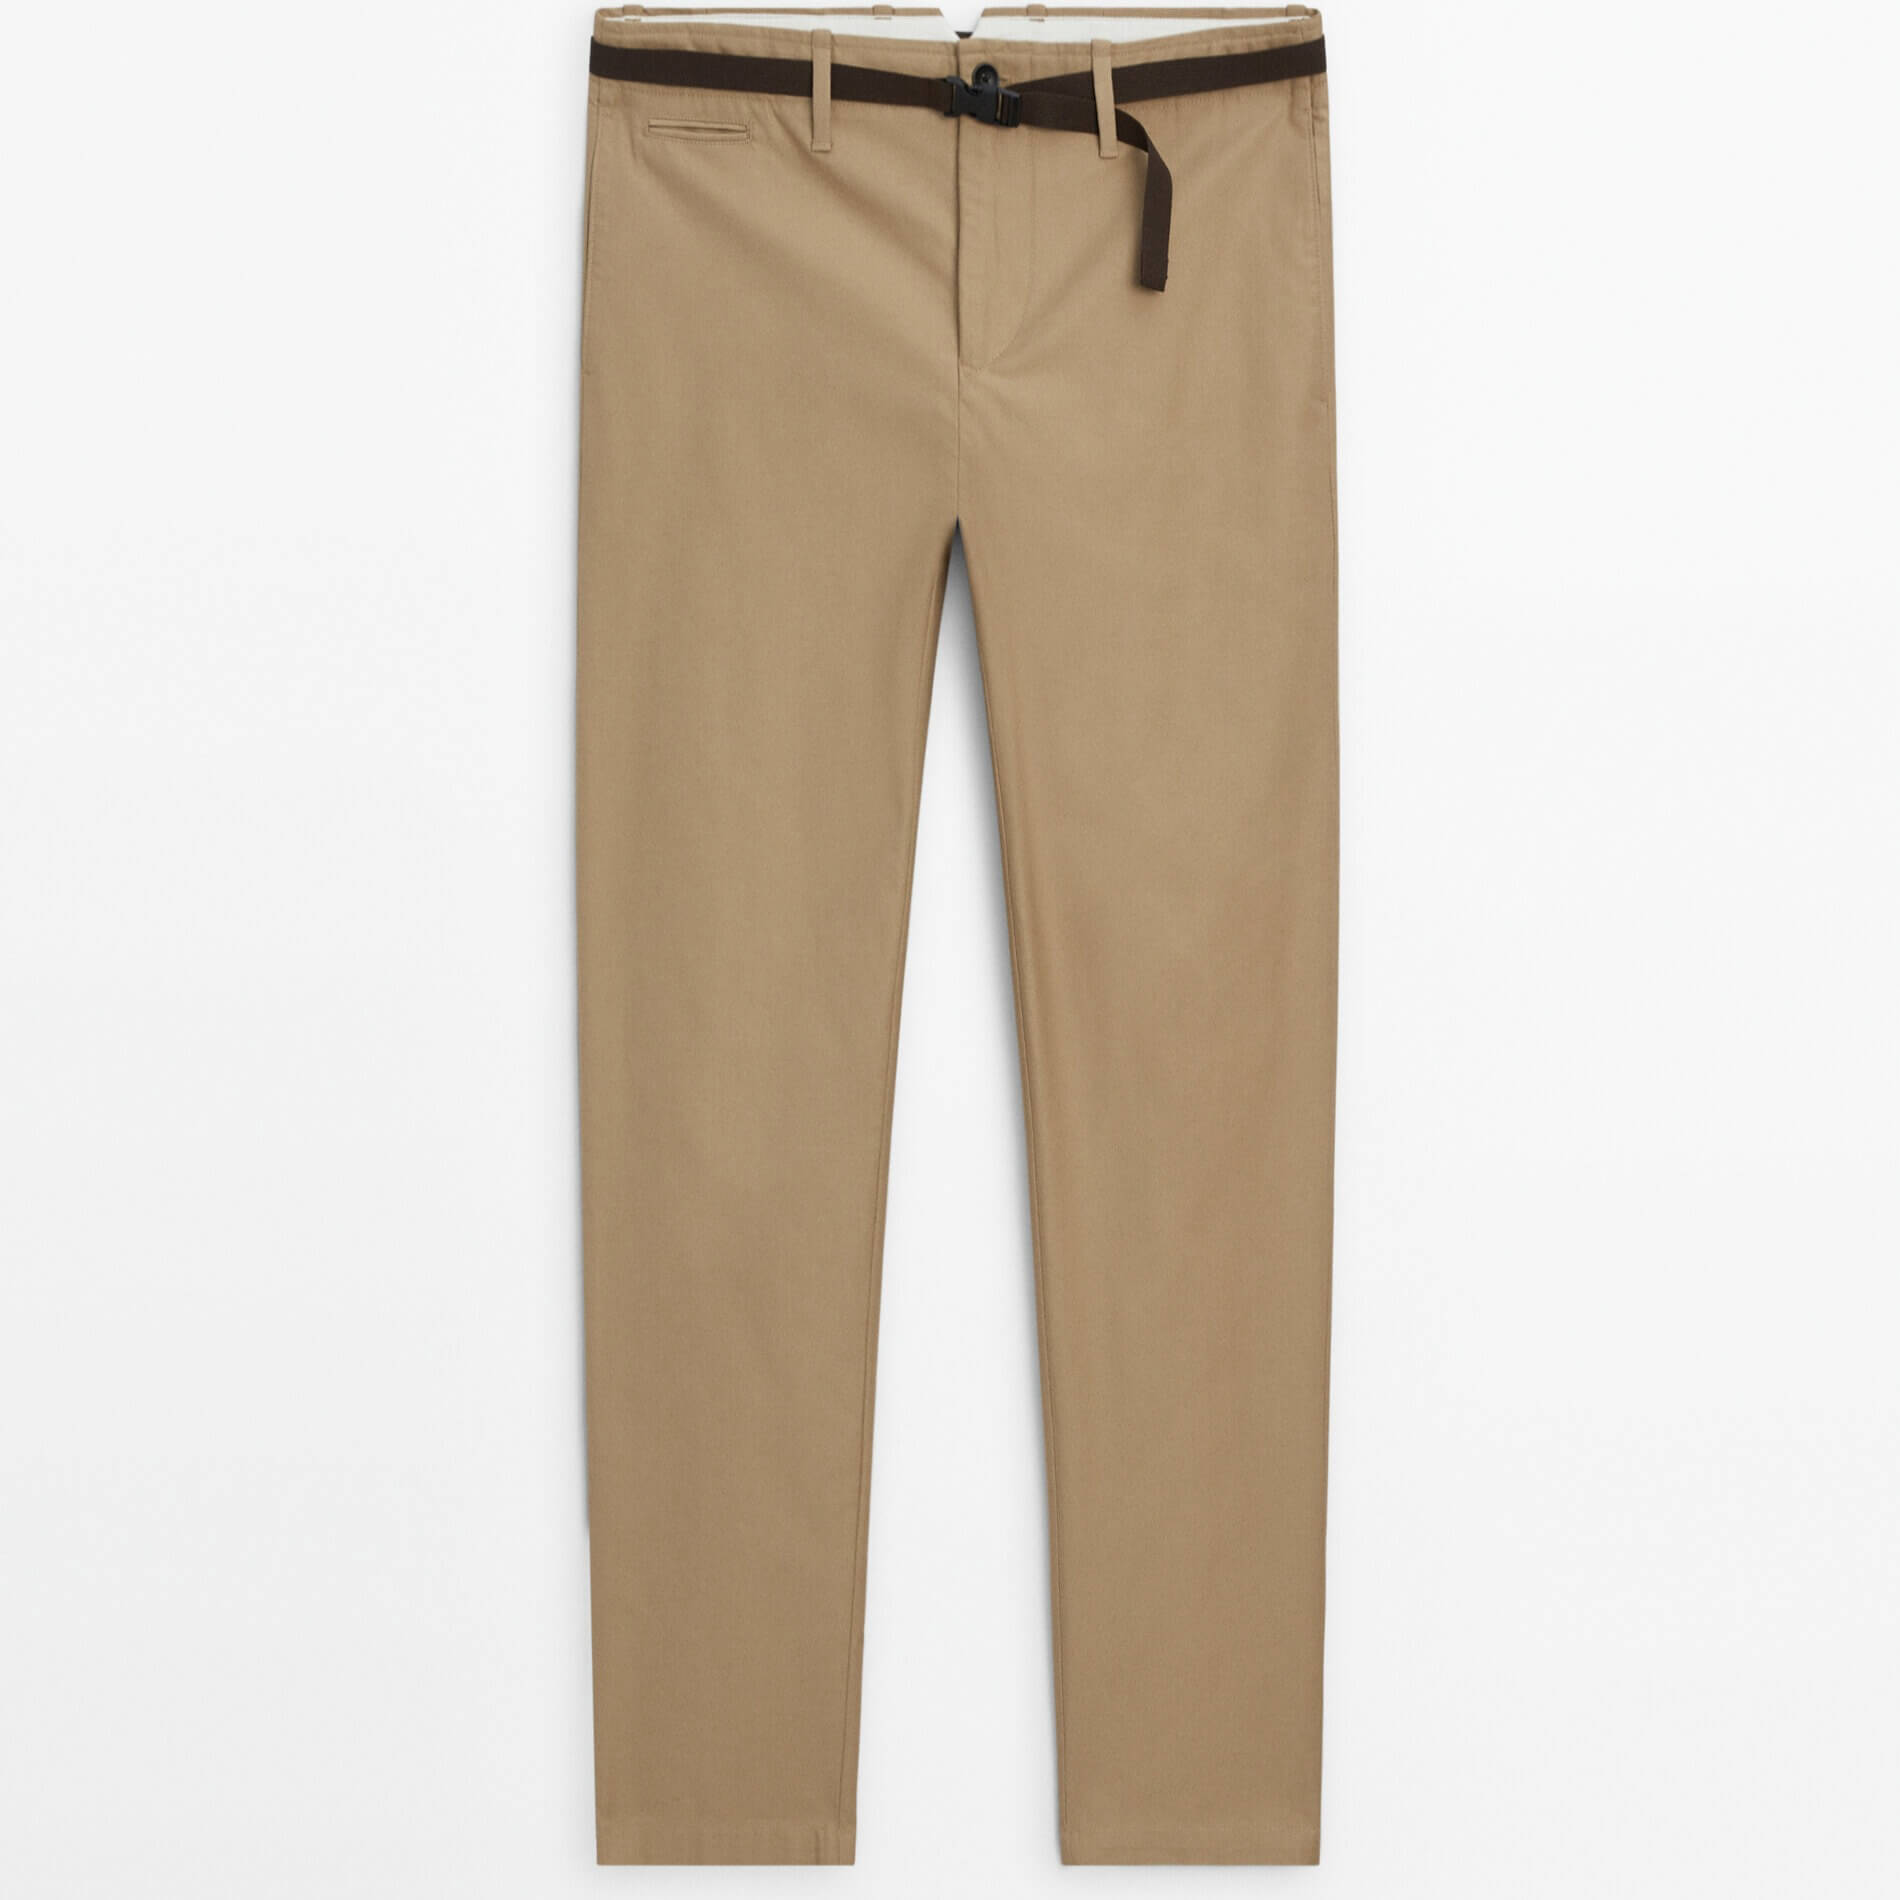 цена Брюки Massimo Dutti Relaxed Fit Belted Chino, бежевый